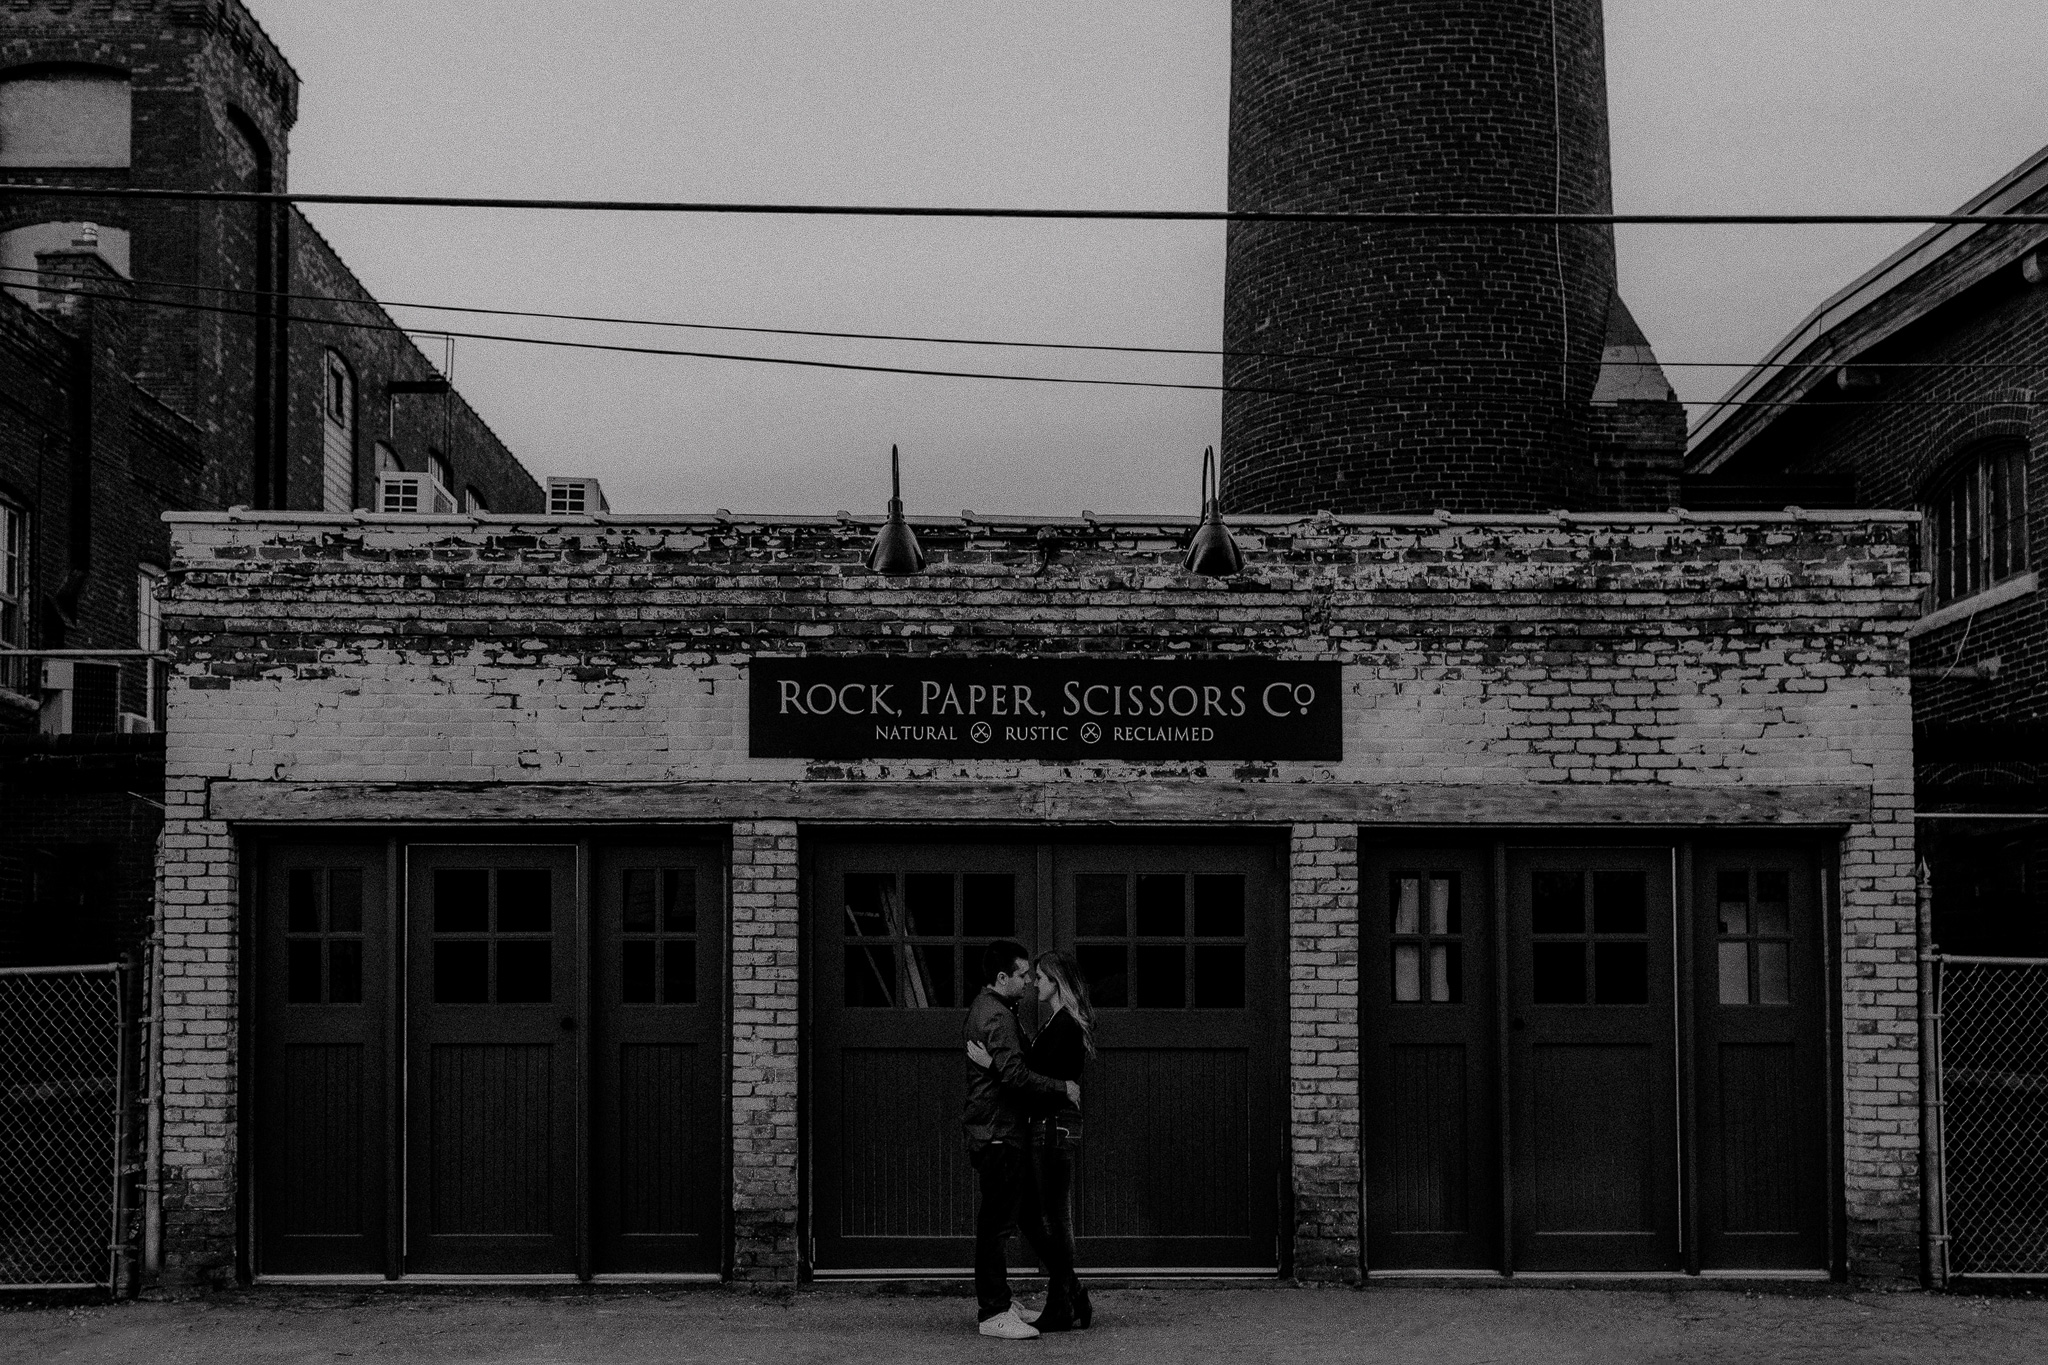 Engagement photo in front of Rock, Paper Scissors Co. sign at The Cotton Factory